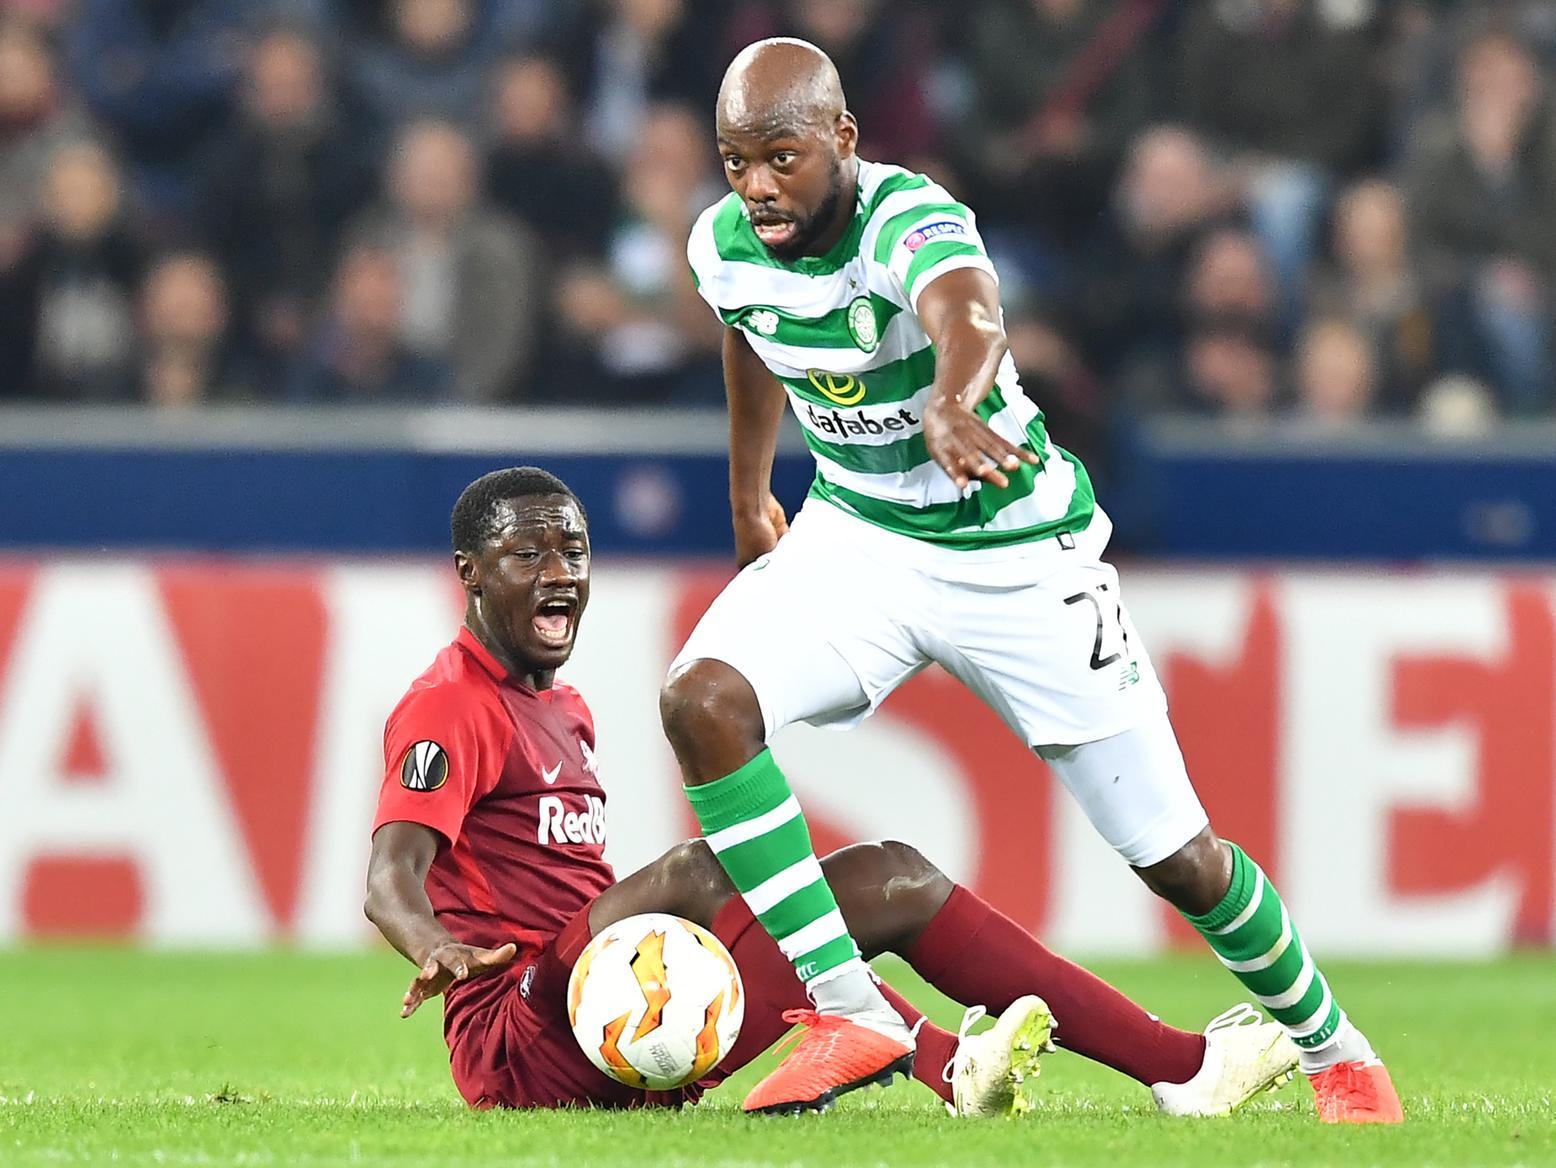 Former Celtic and PSG midfielder Youssouf Mulumbu is understood to be on trial with Birmingham City, with an eye to securing his first contract since leaving Celtic last June. (Birmingham Mail)